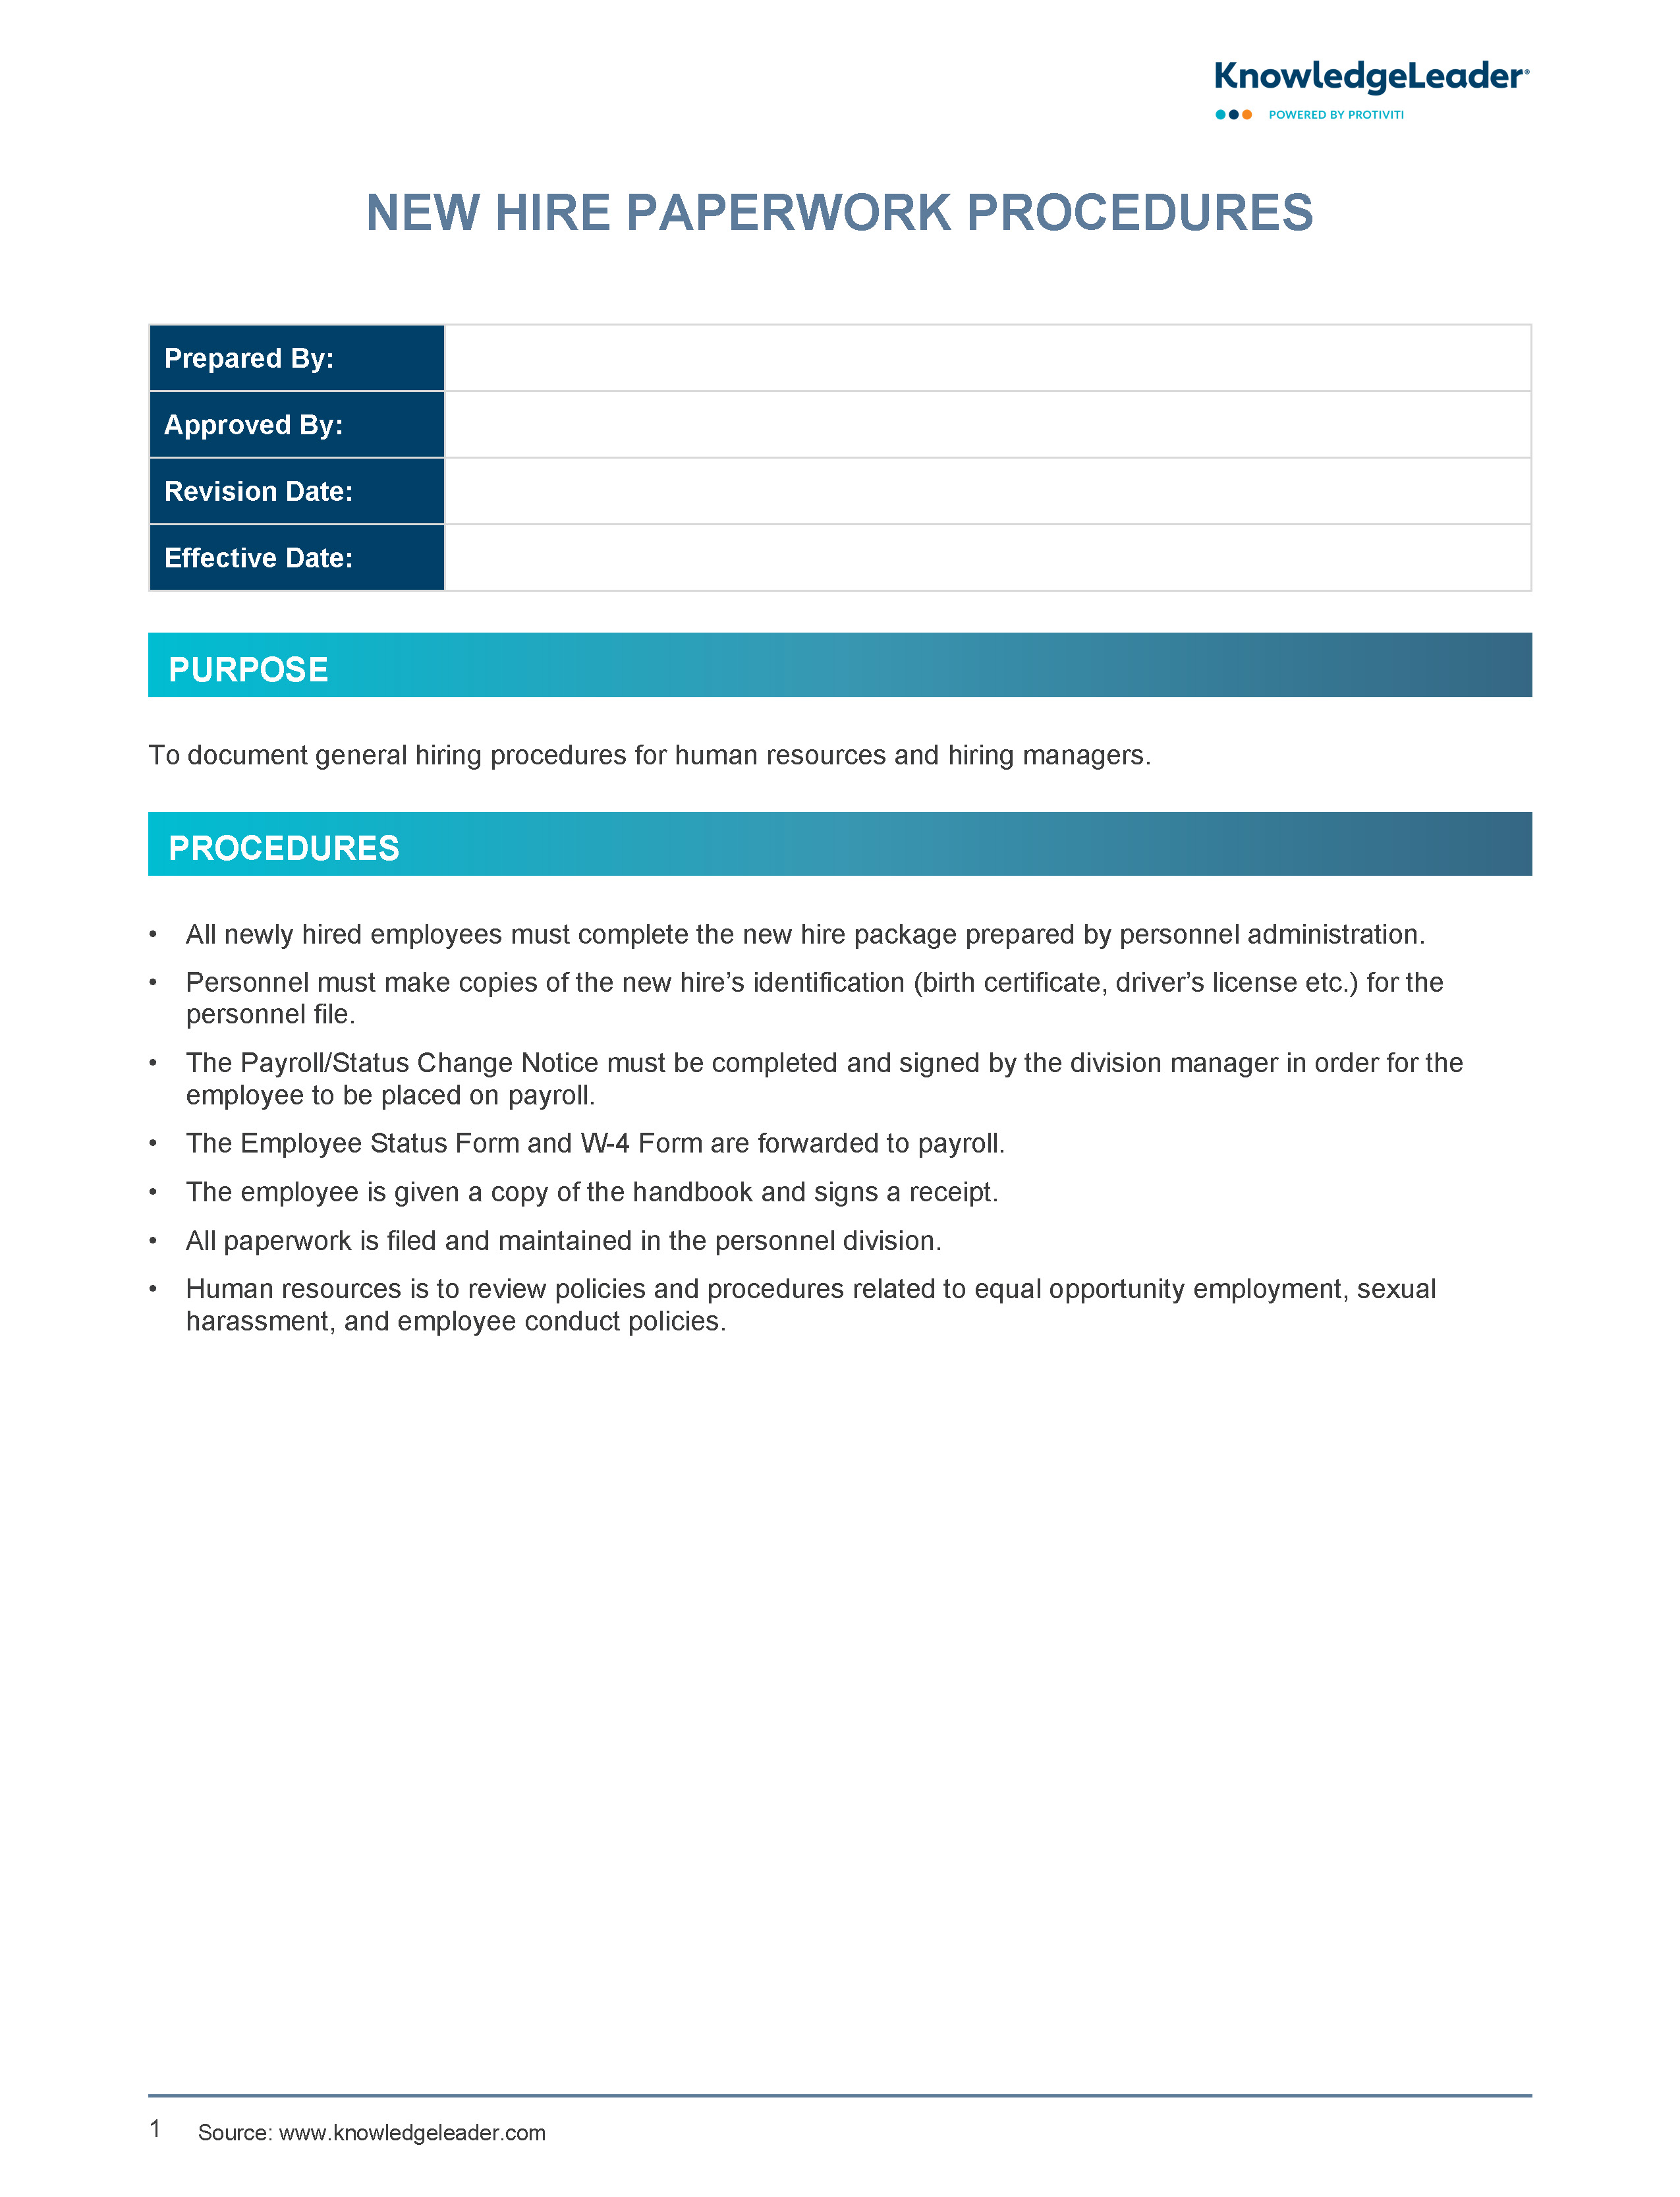 Screenshot of the first page of New Hire Paperwork Policy